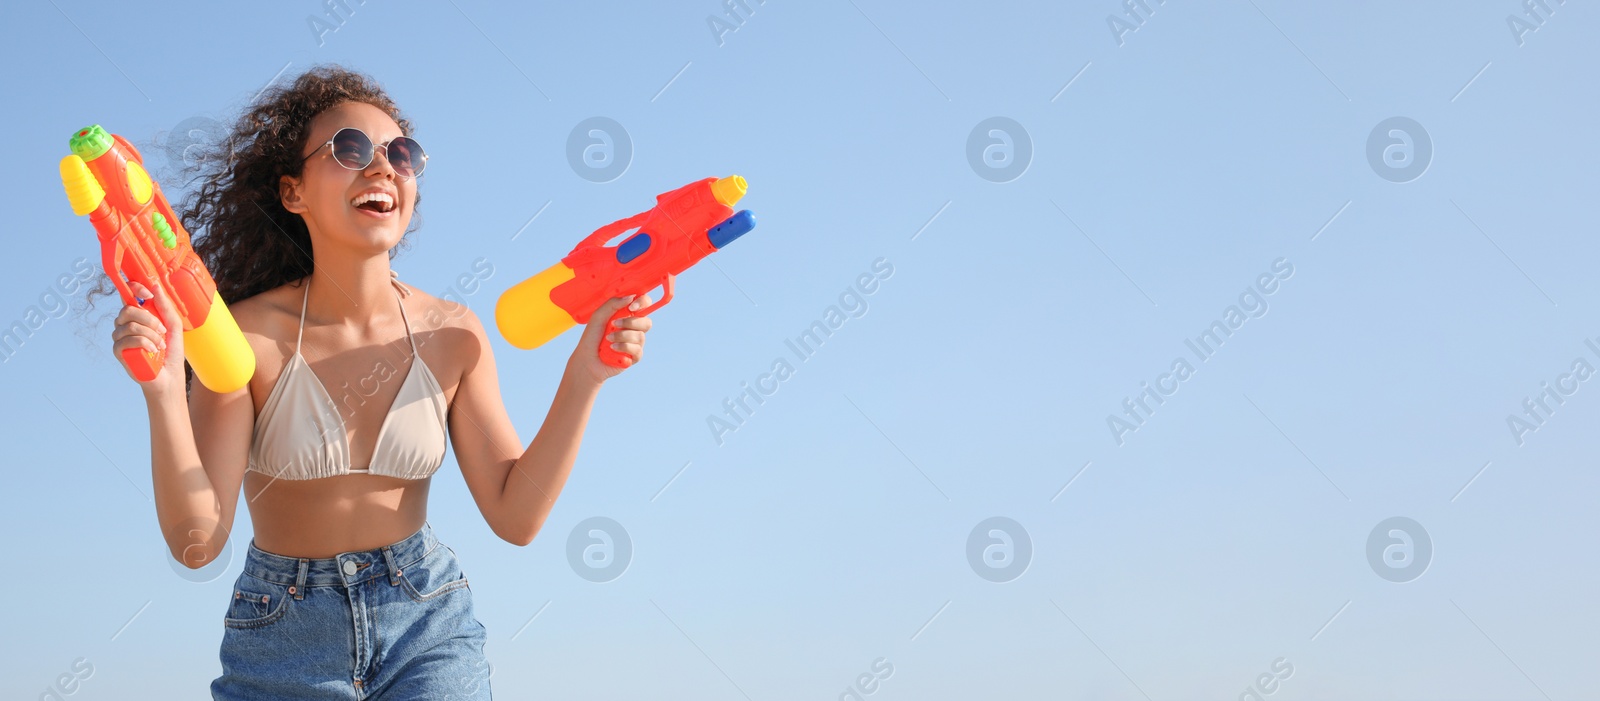 Photo of African American woman with water guns having fun against blue sky